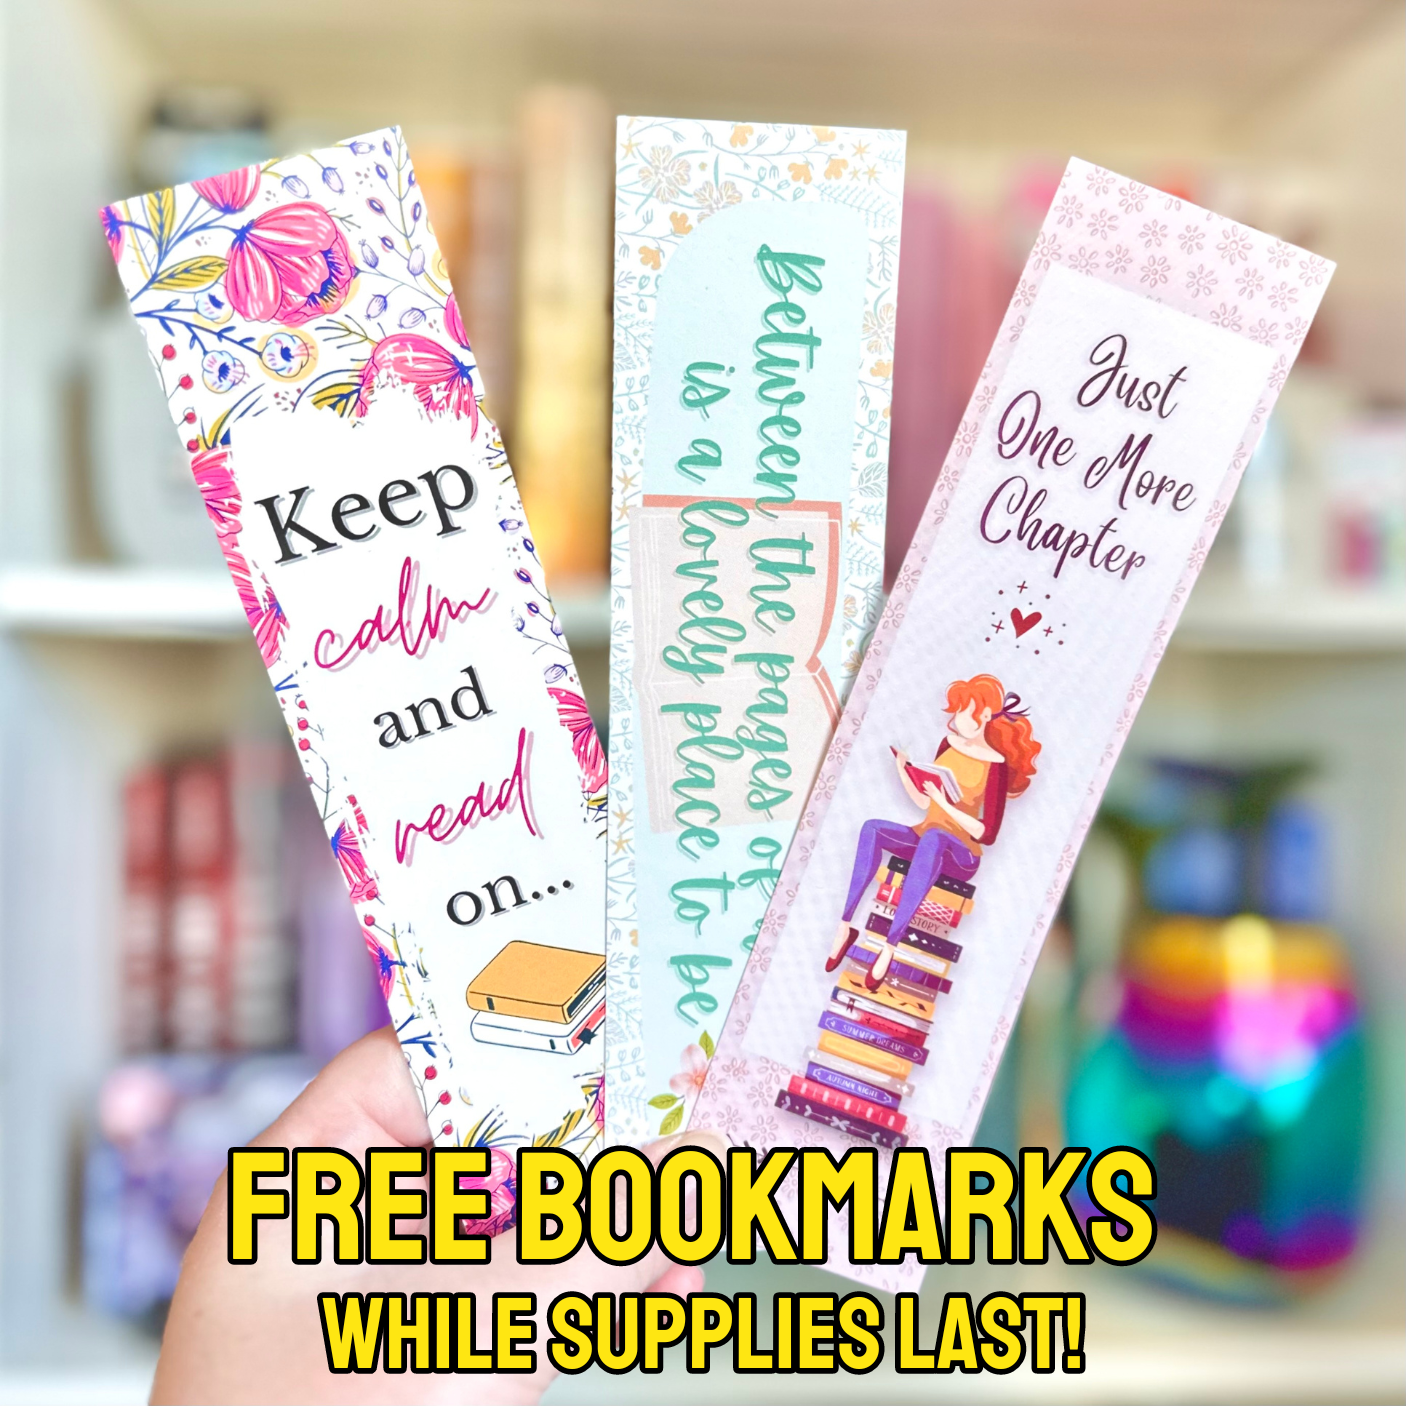 FREE BOOKMARKS!